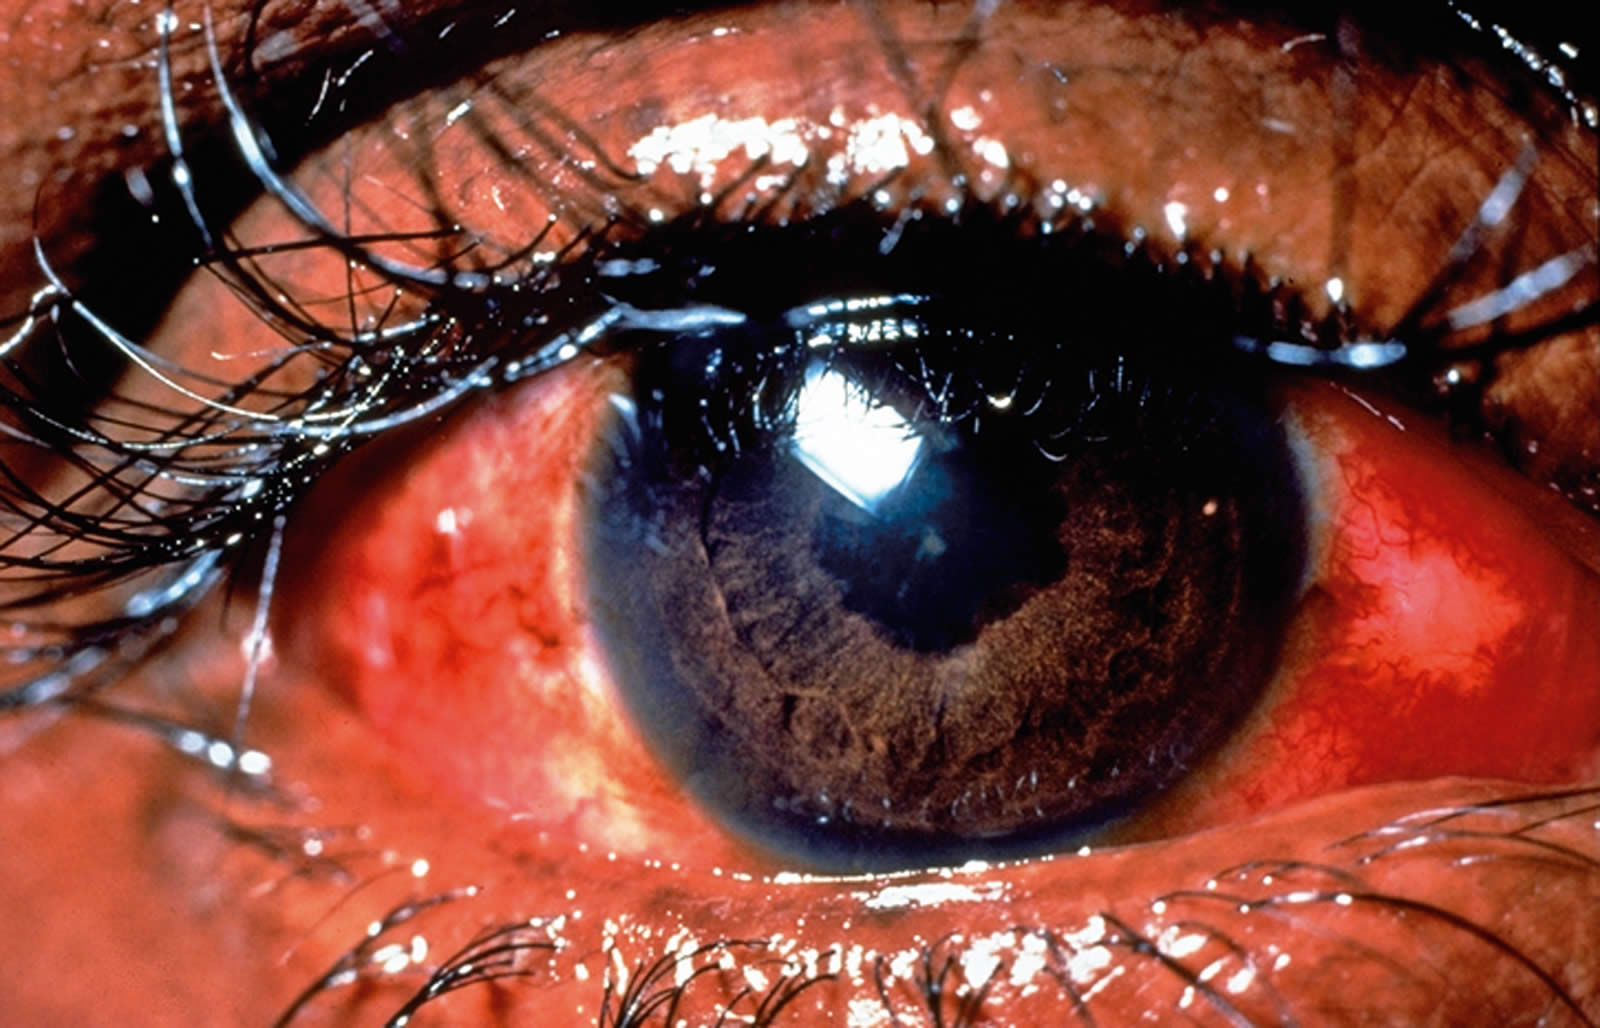 Community Eye Health Journal » The red eye – first at the primary